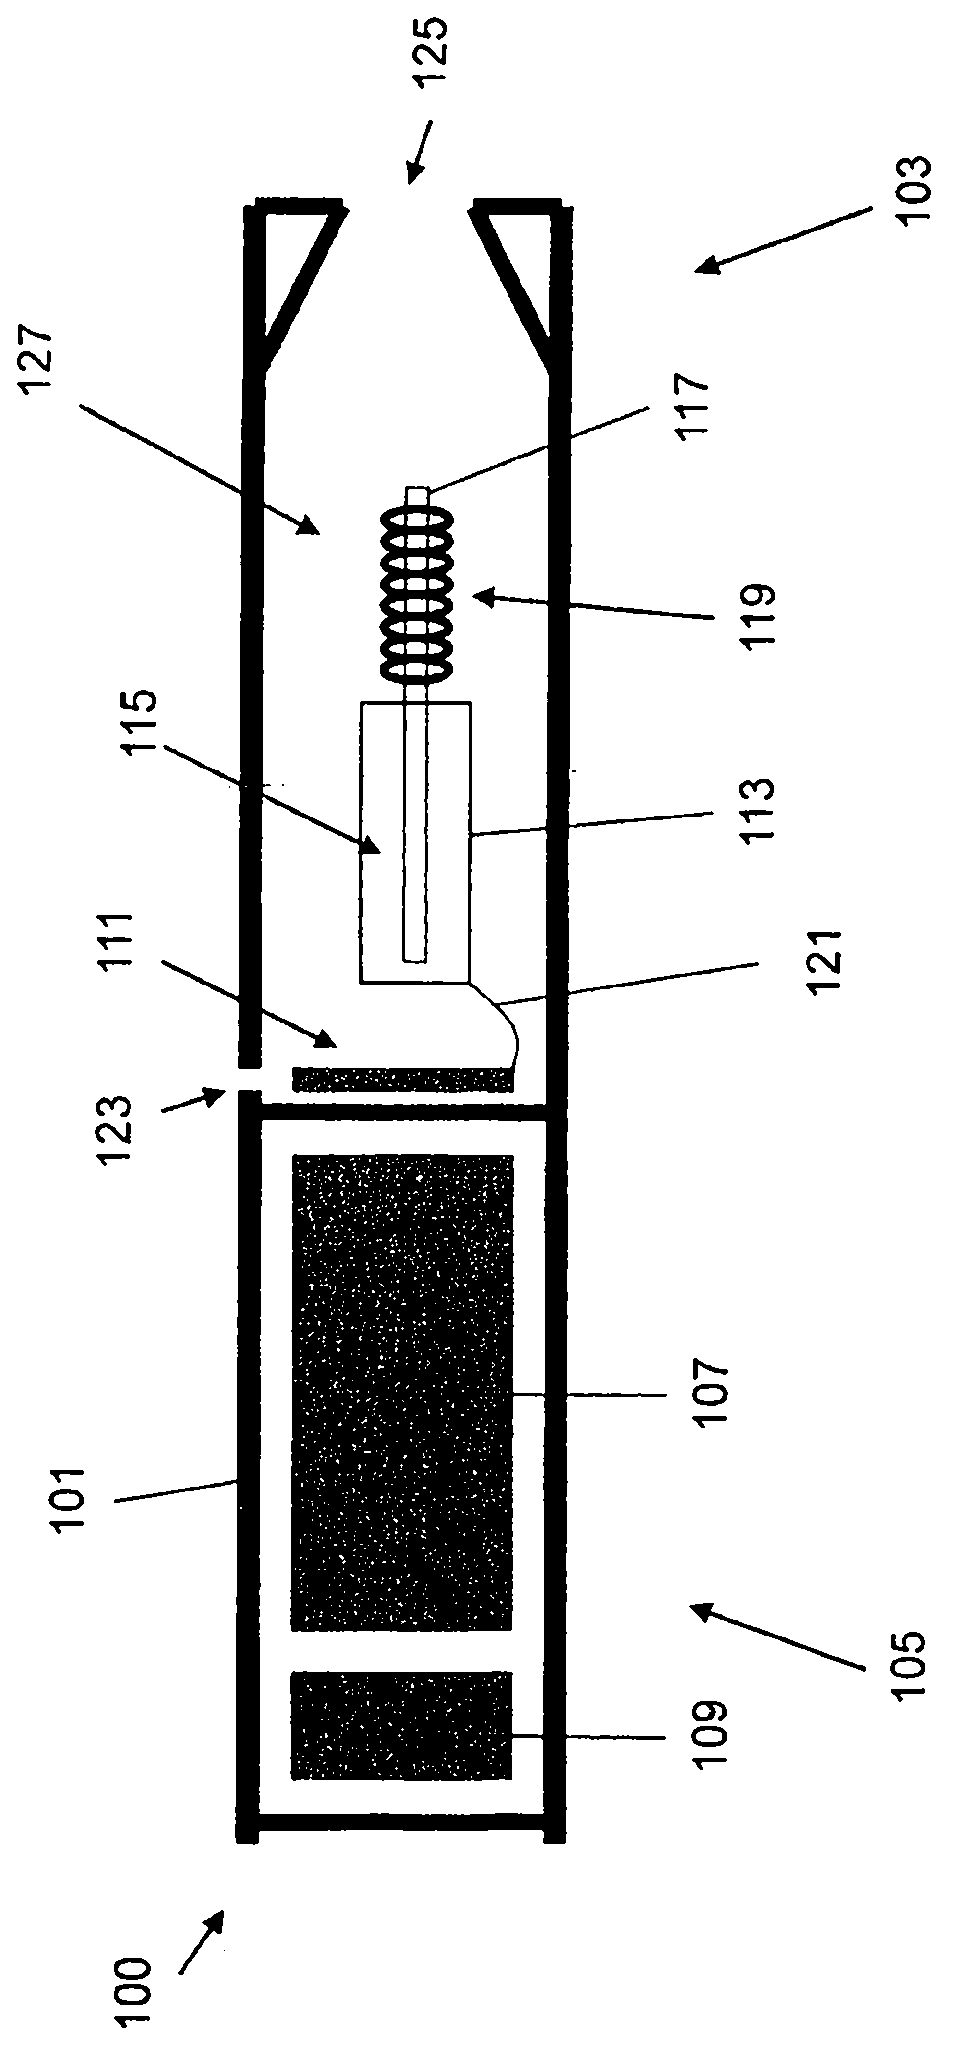 Aerosol generating system with means for disabling consumable